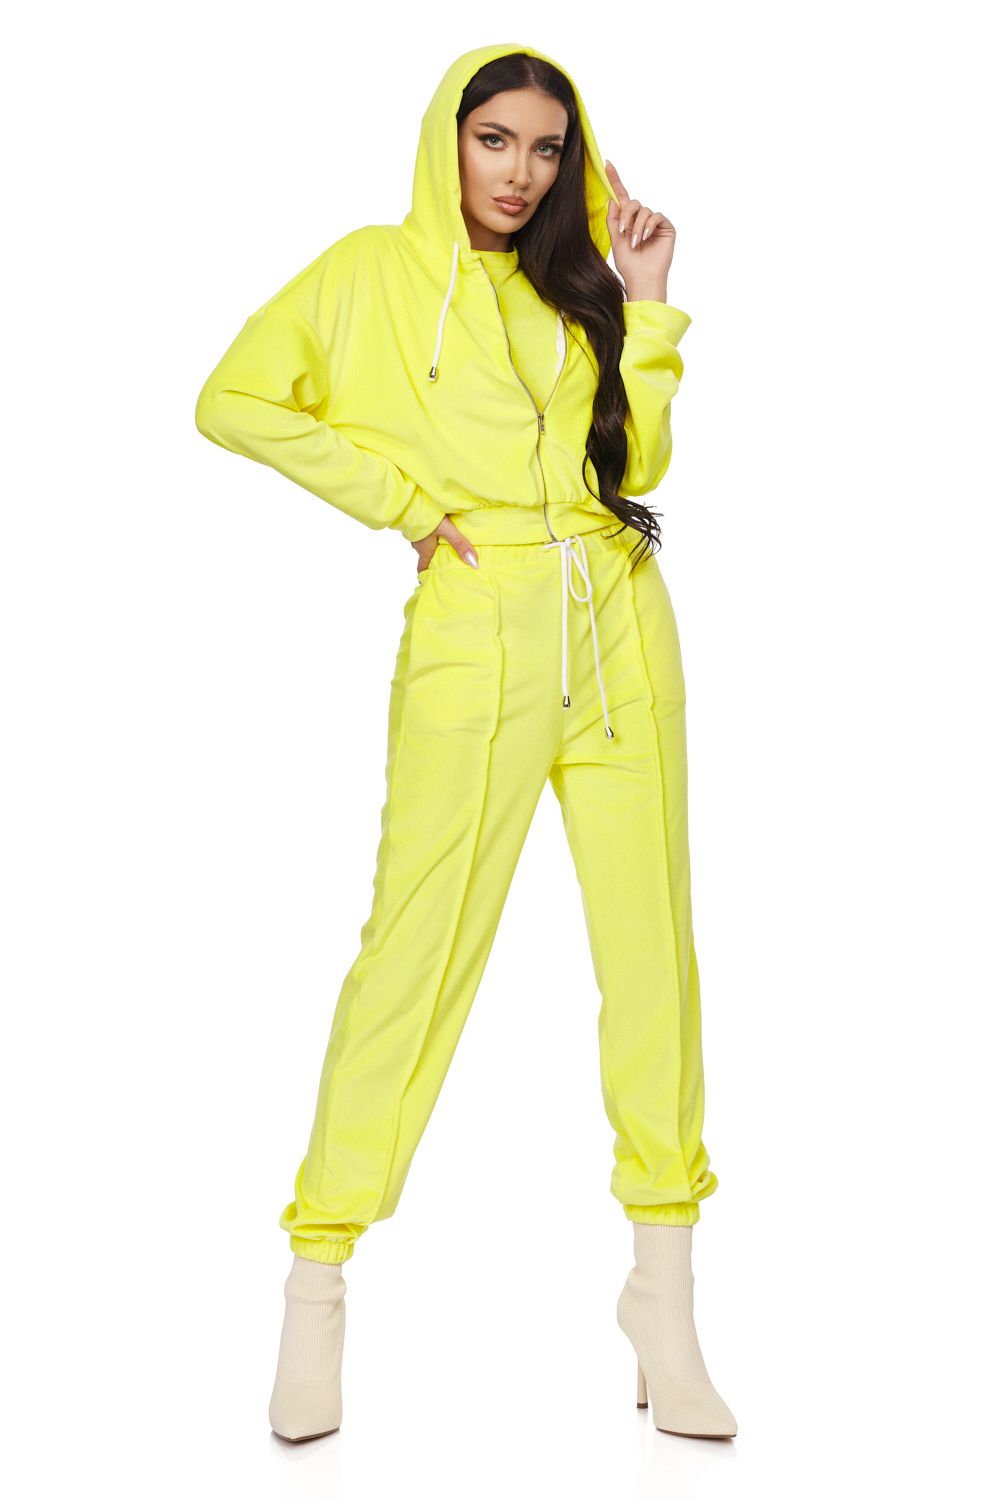 Melos Bogas casual yellow ladies' tracksuit